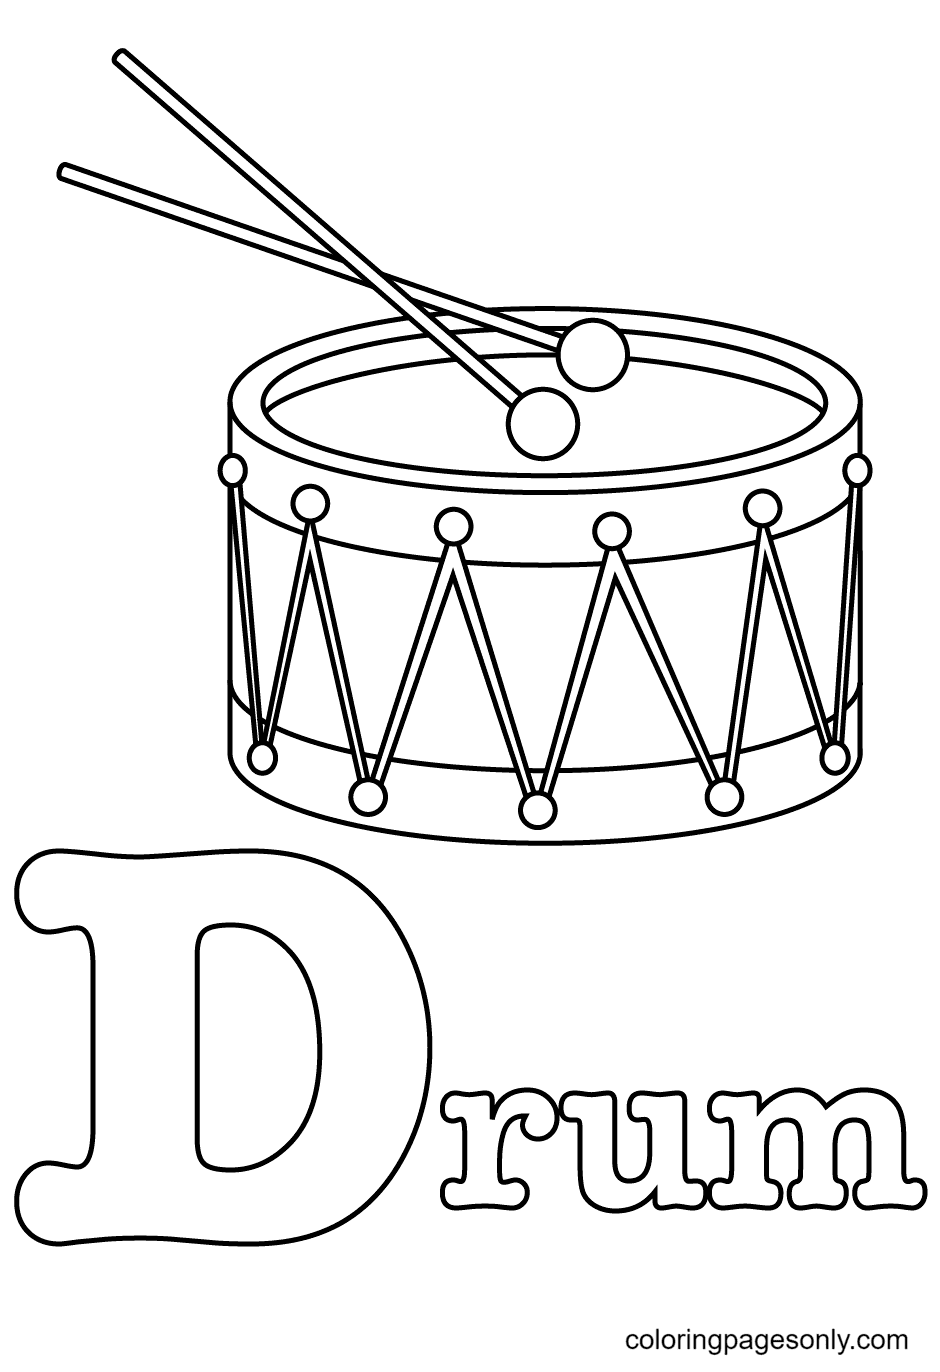 D is for Drum Coloring Pages